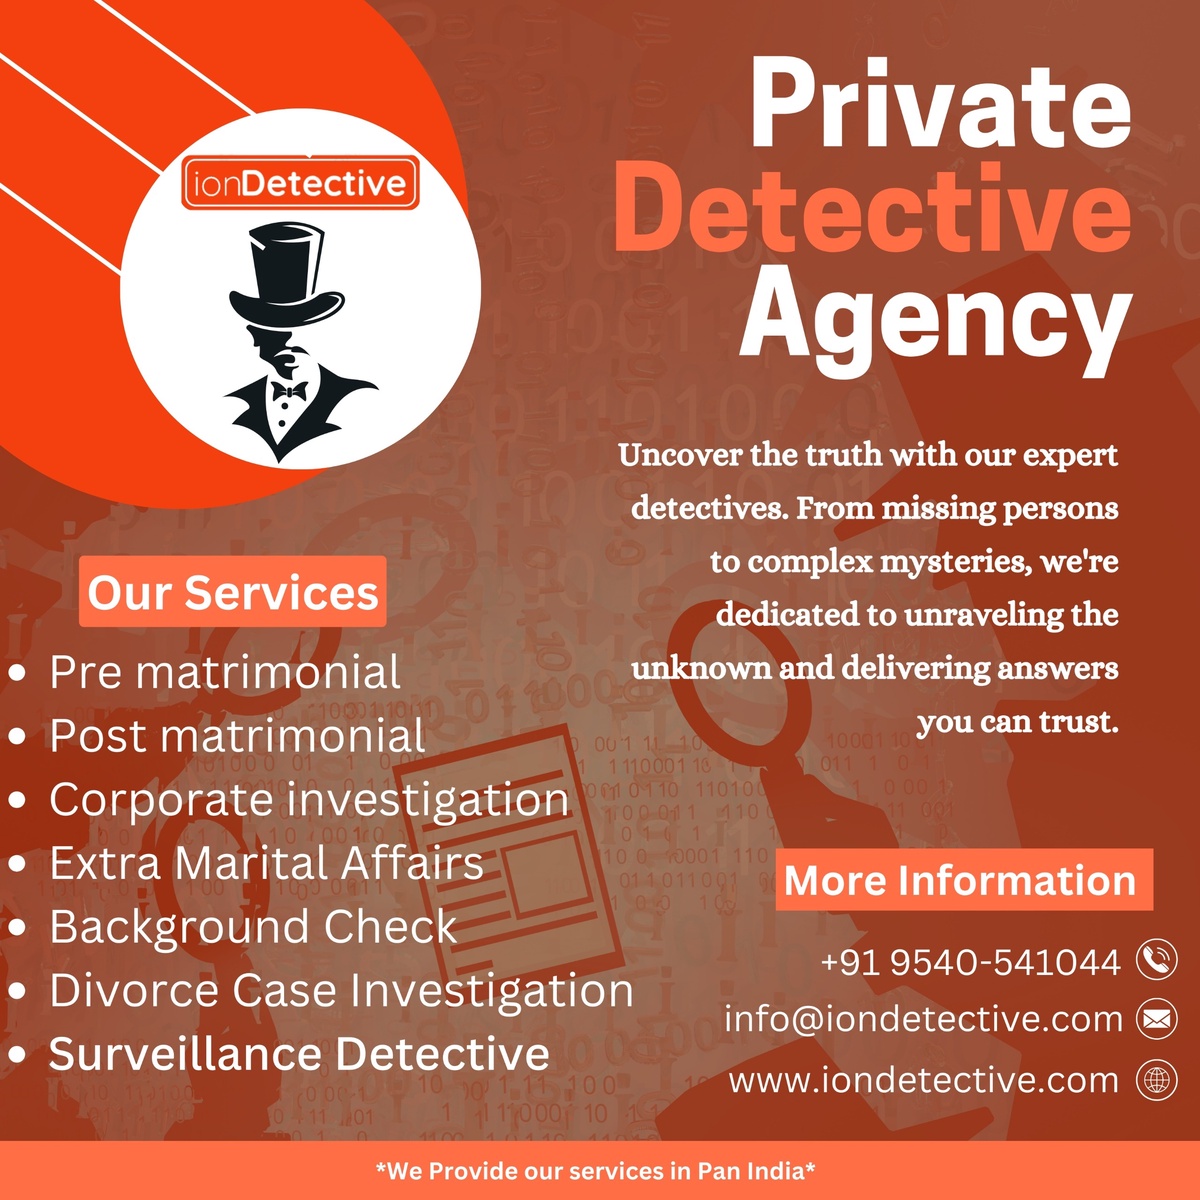 Innovations in Private Investigations: Ion Detective Agency's Approach